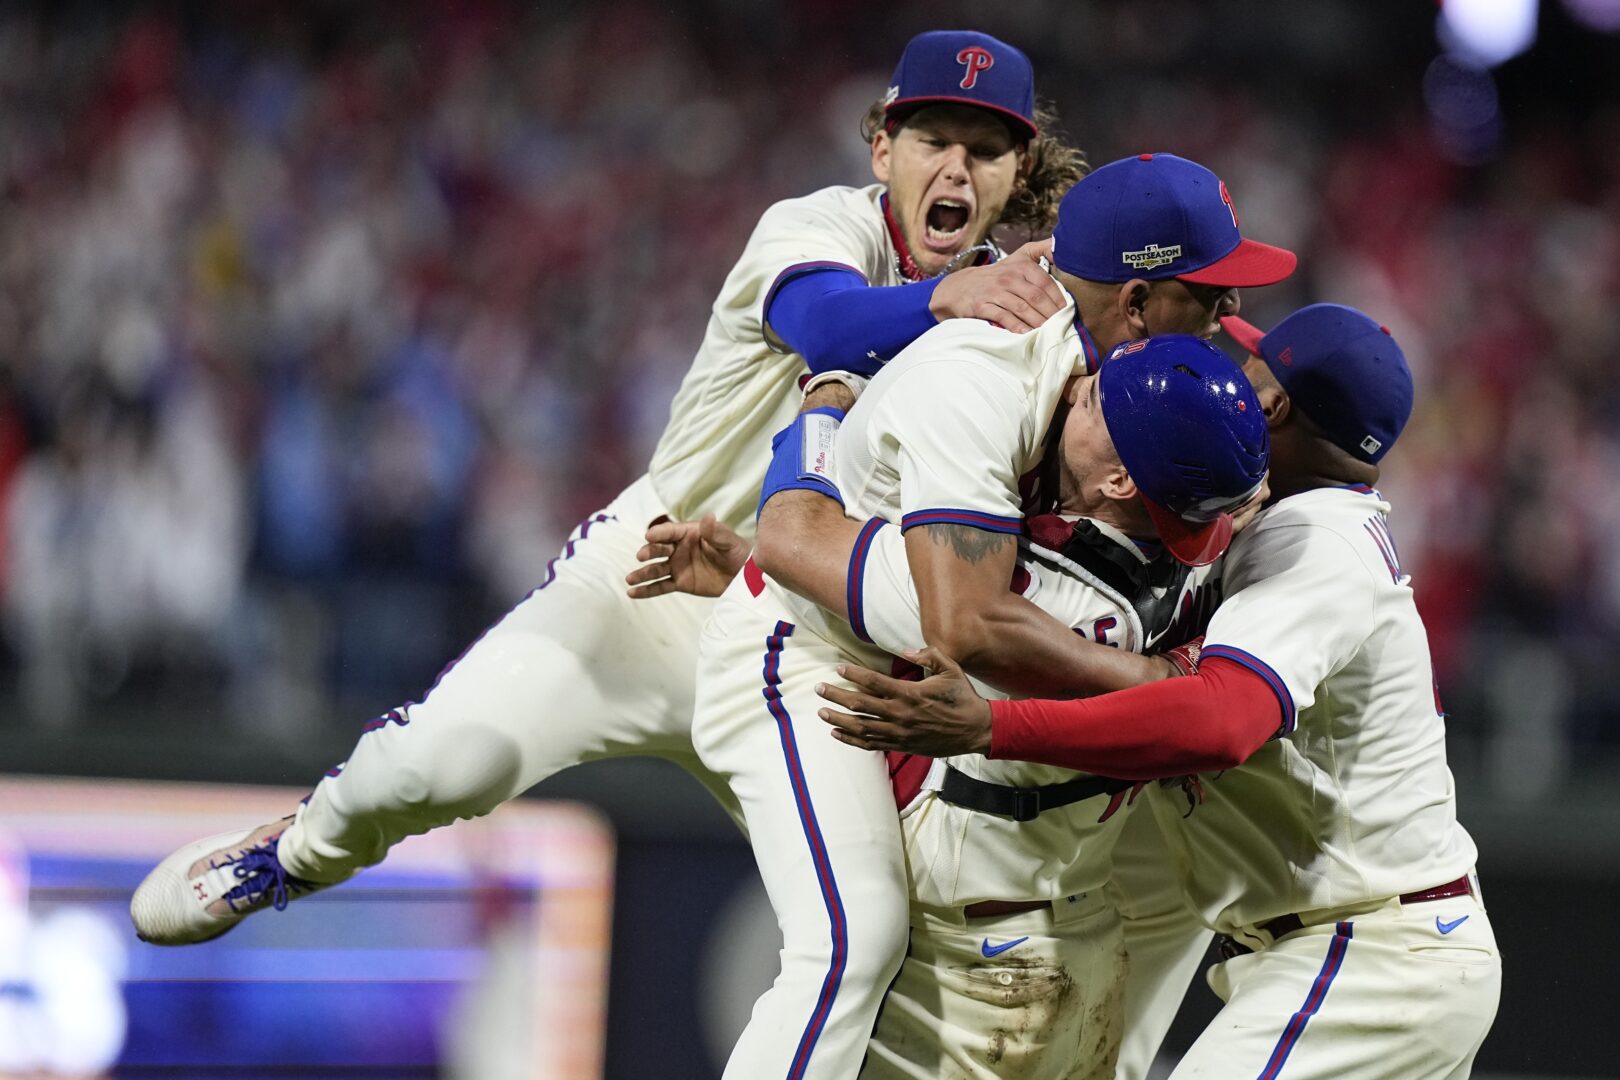 The Phillies are World Series bound. Here's the full schedule and